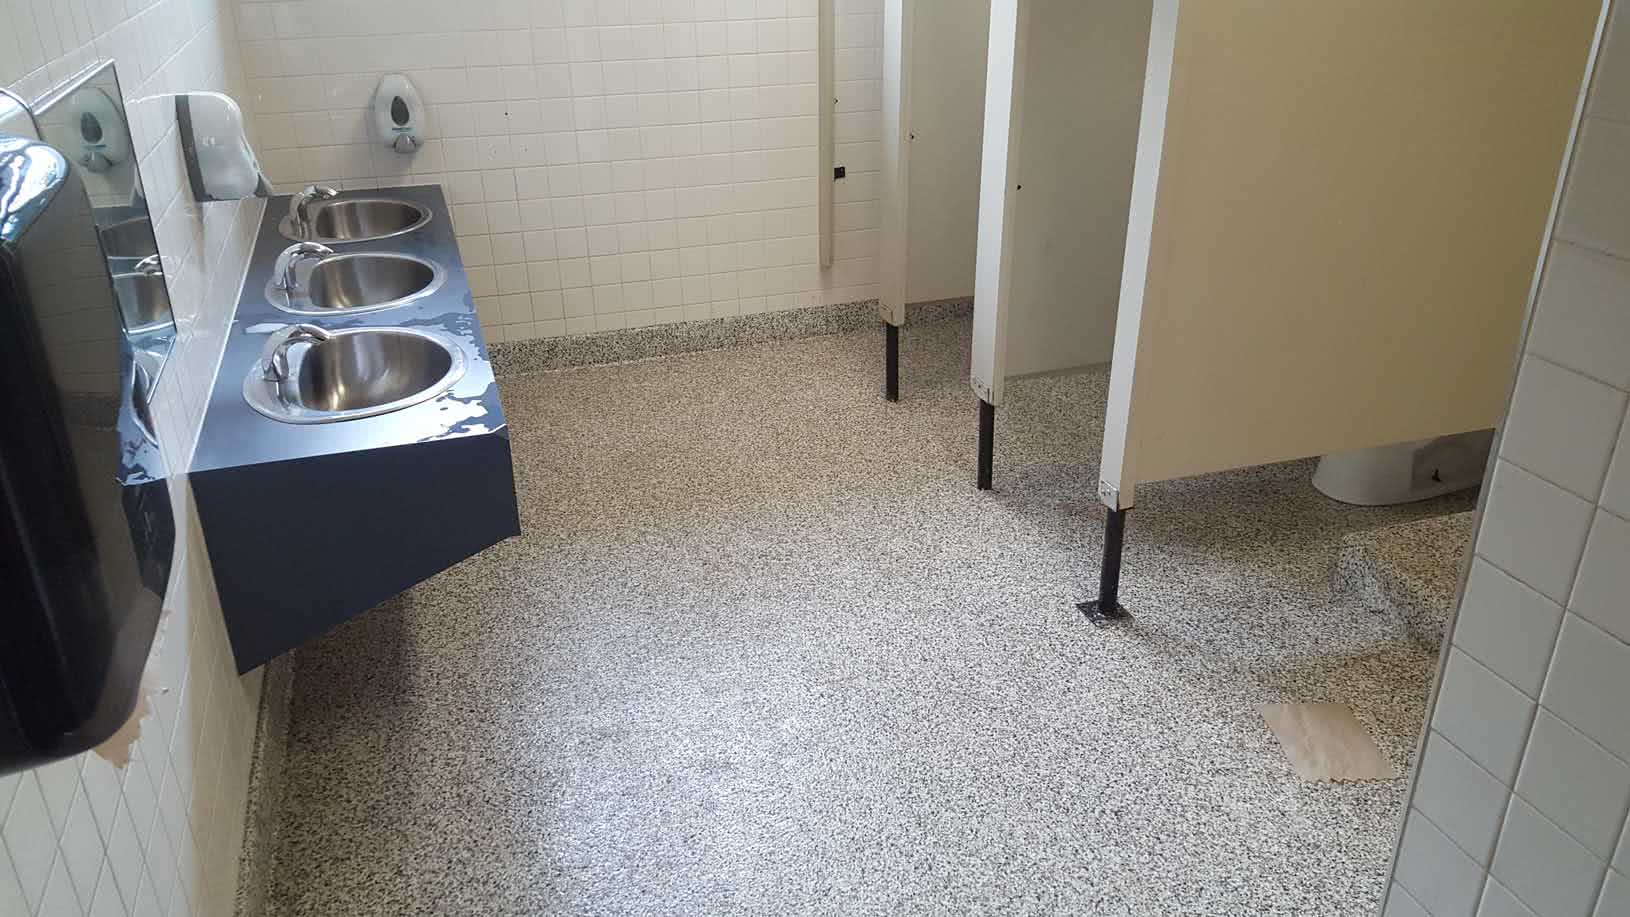 Epoxy floor coating and repair at Lochside Elementary